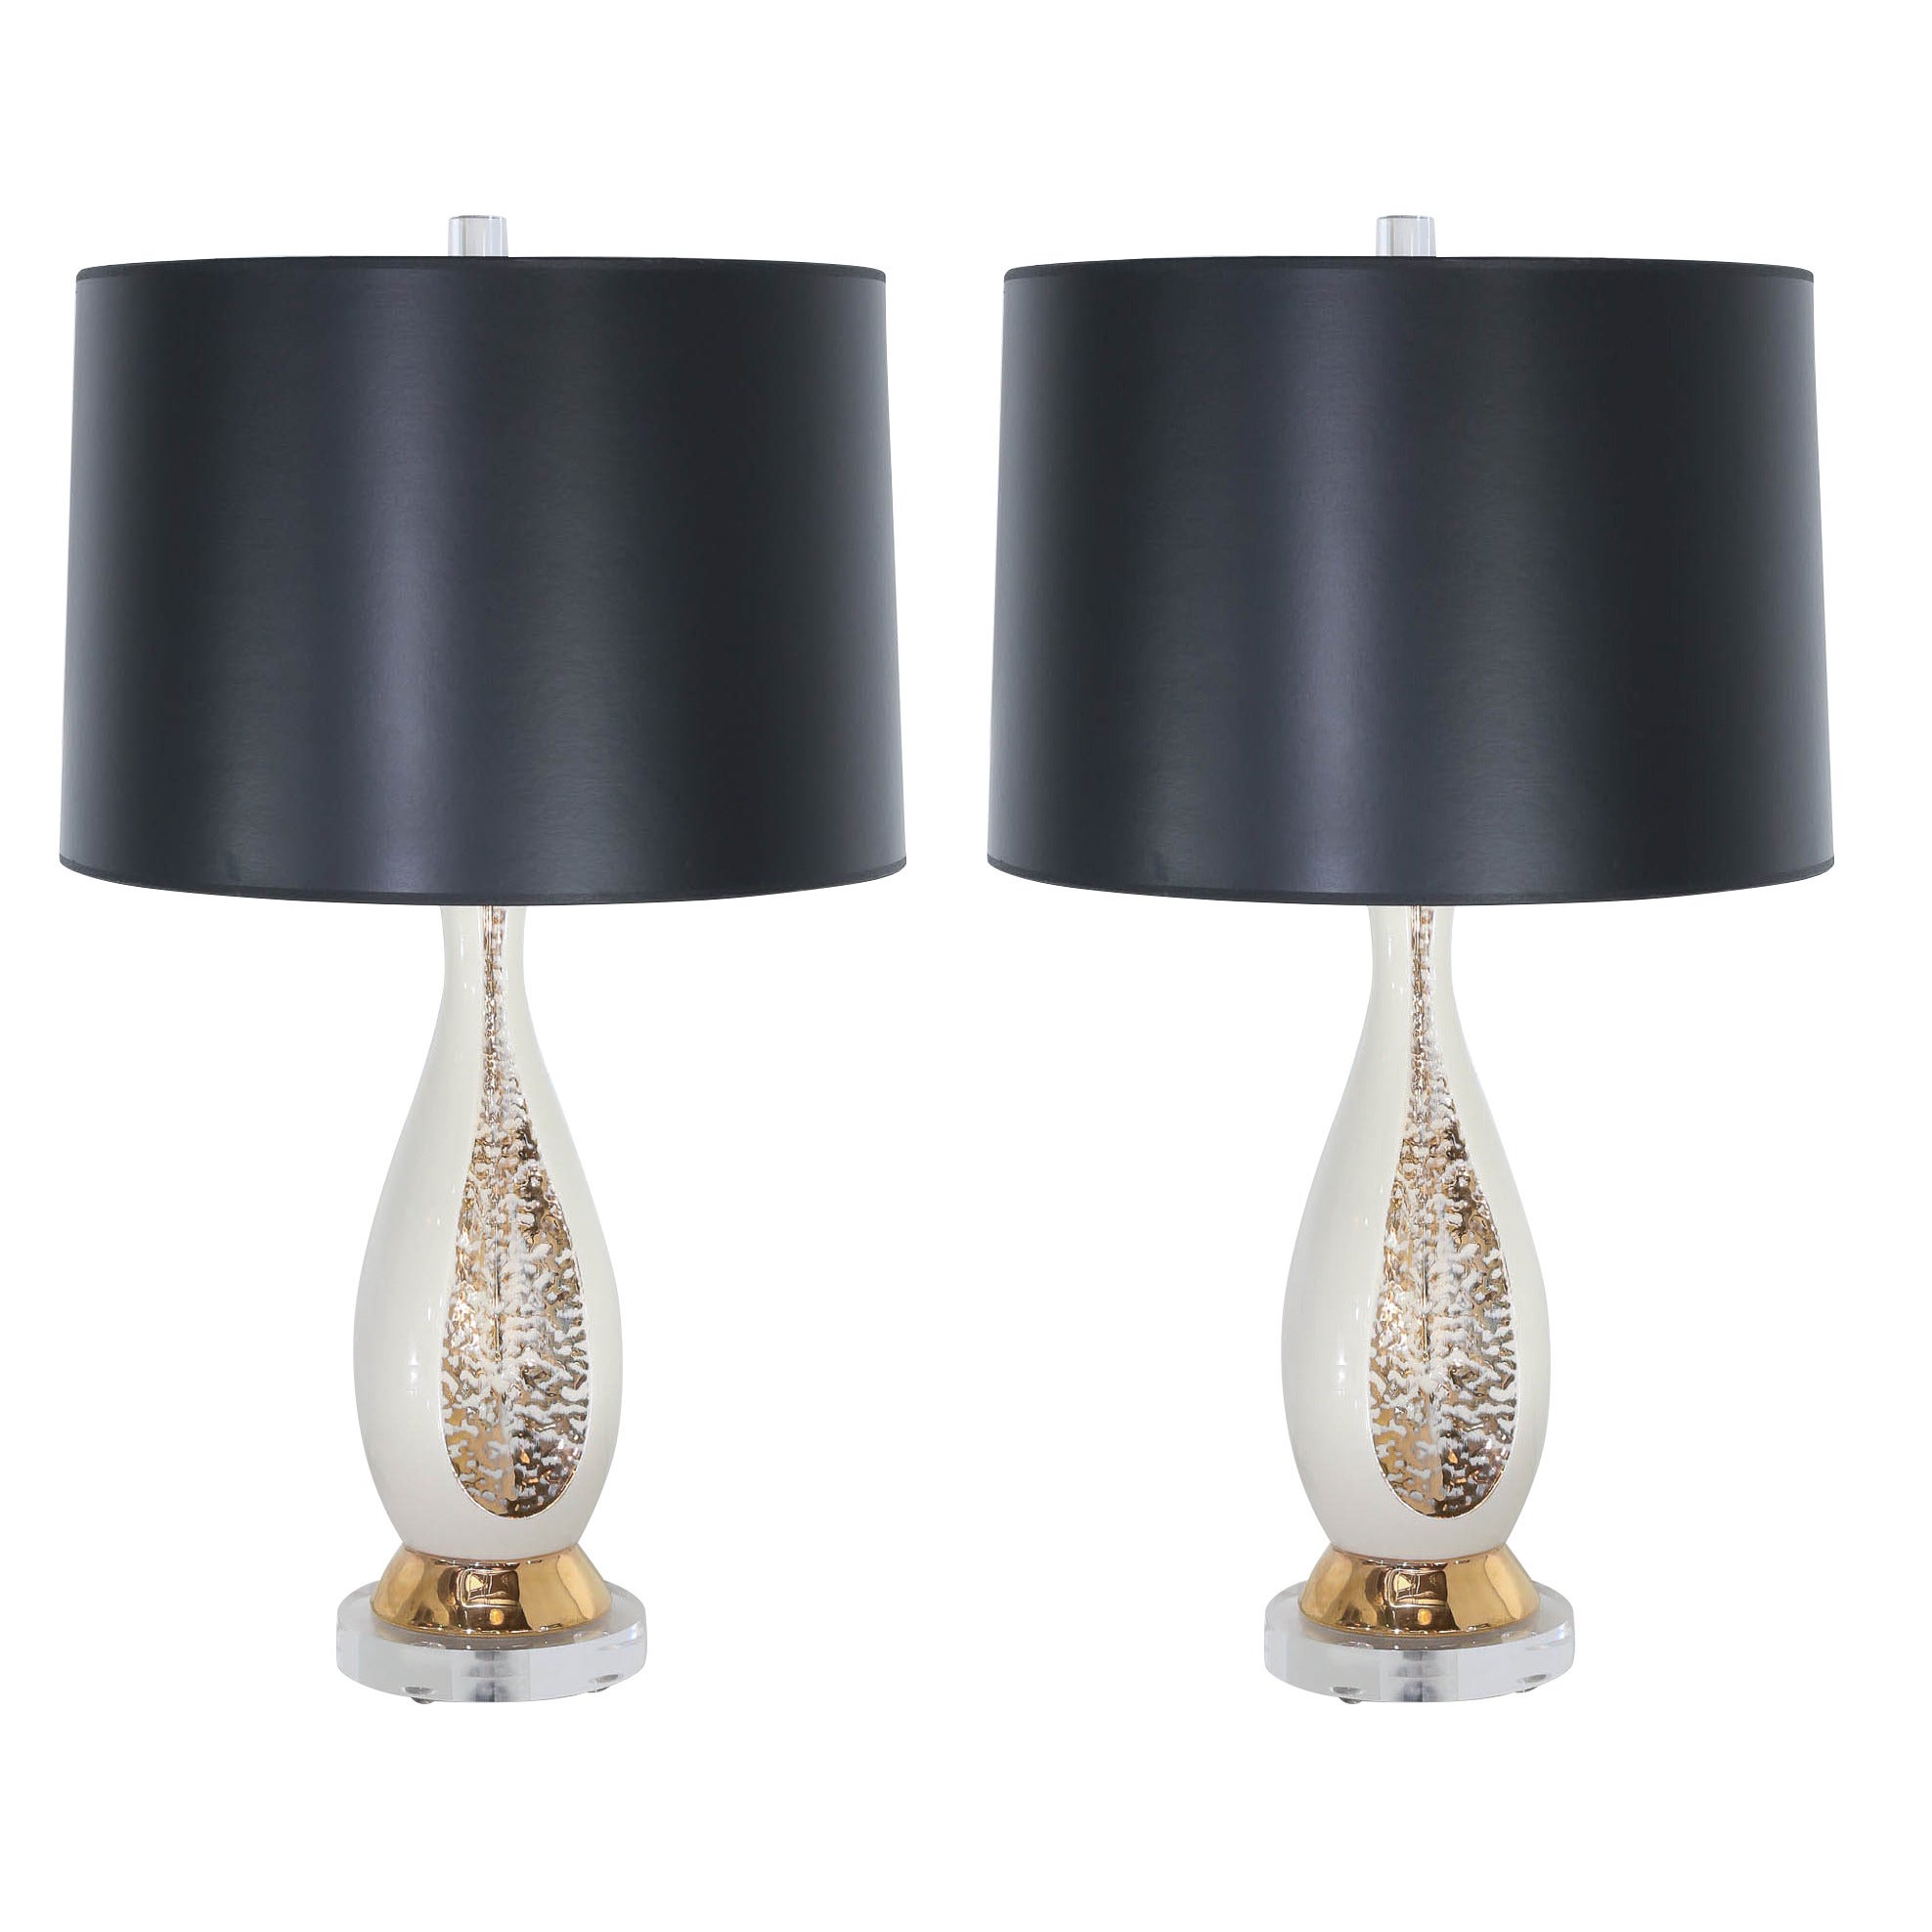 Pr of Mid Century Modern Danish Lacquered White & Gold Table Lamps w/ Lucite